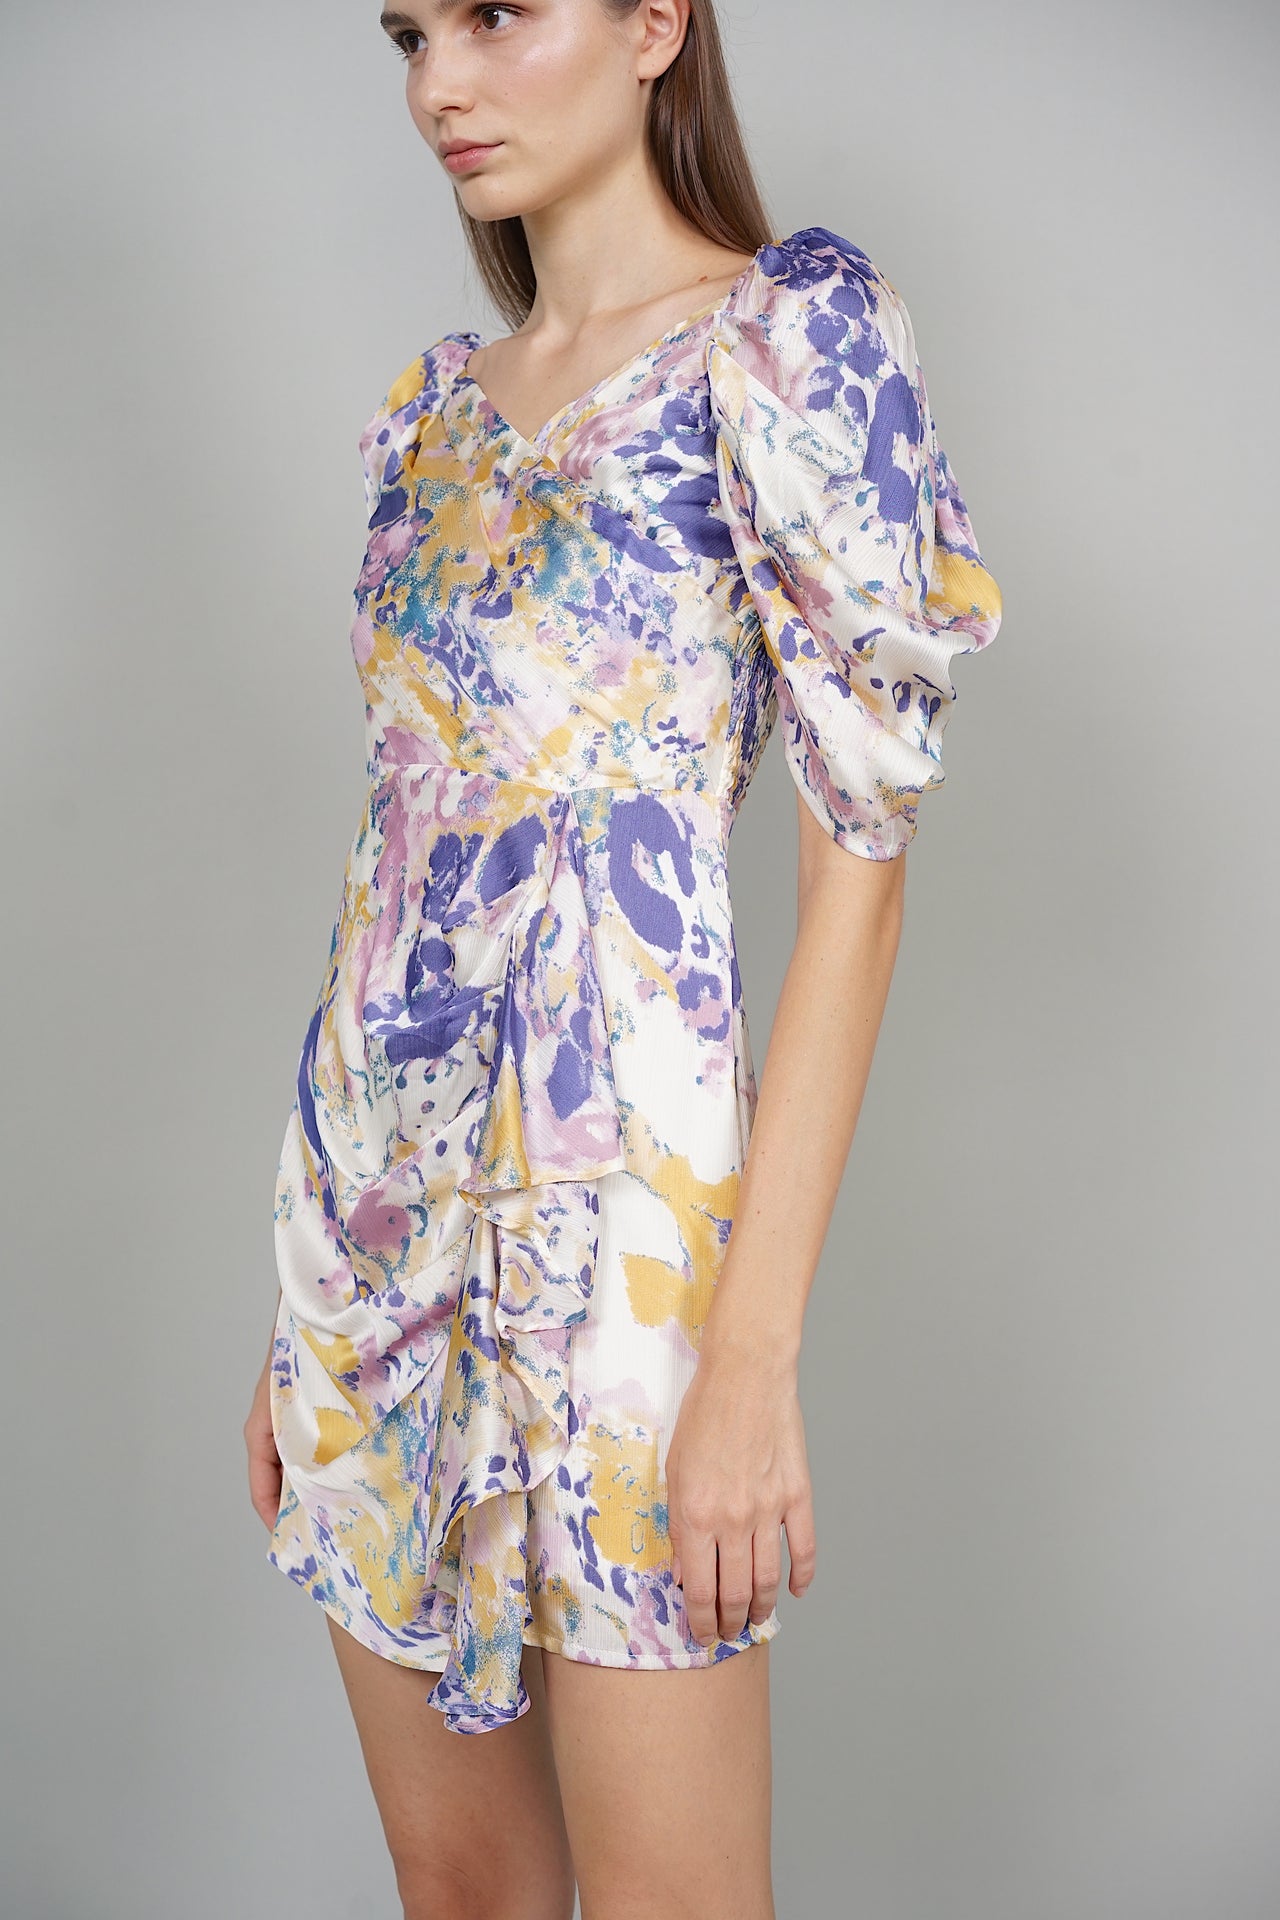 Quinn Abstract Dress in Purple Blue